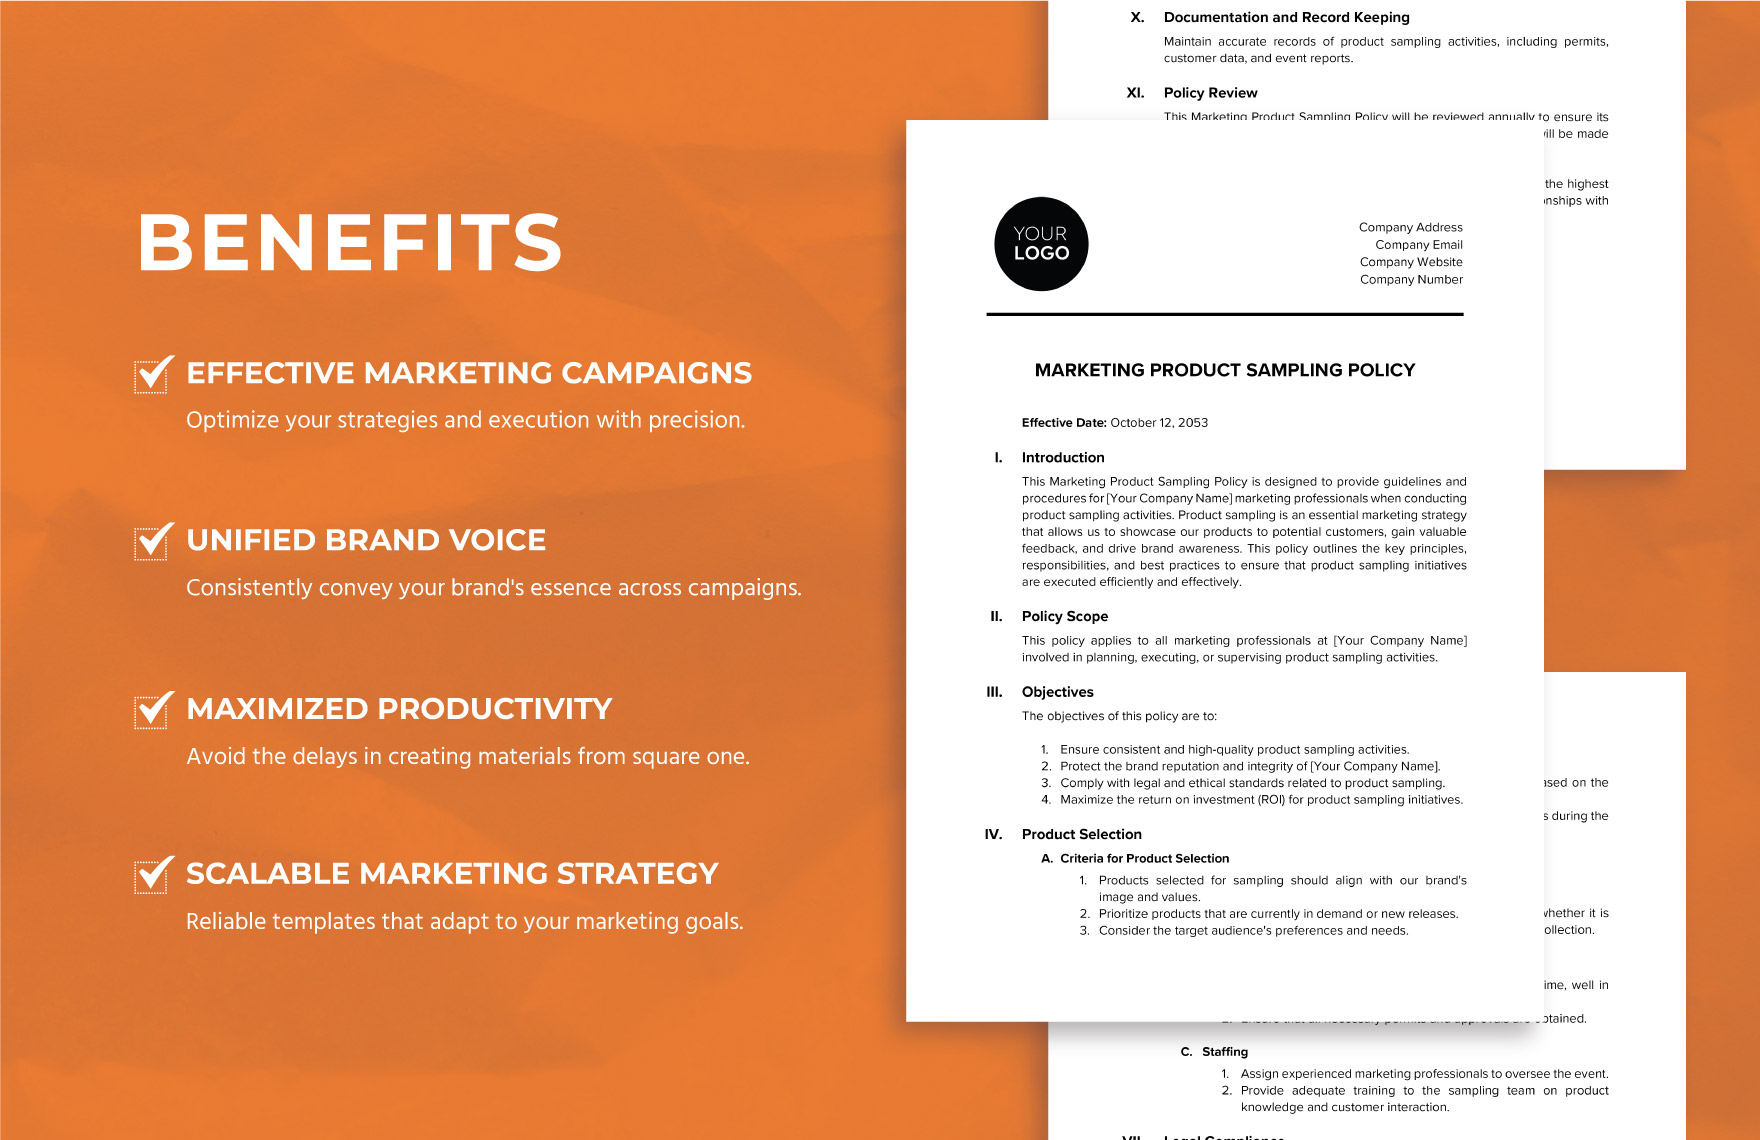 Marketing Product Sampling Policy Template